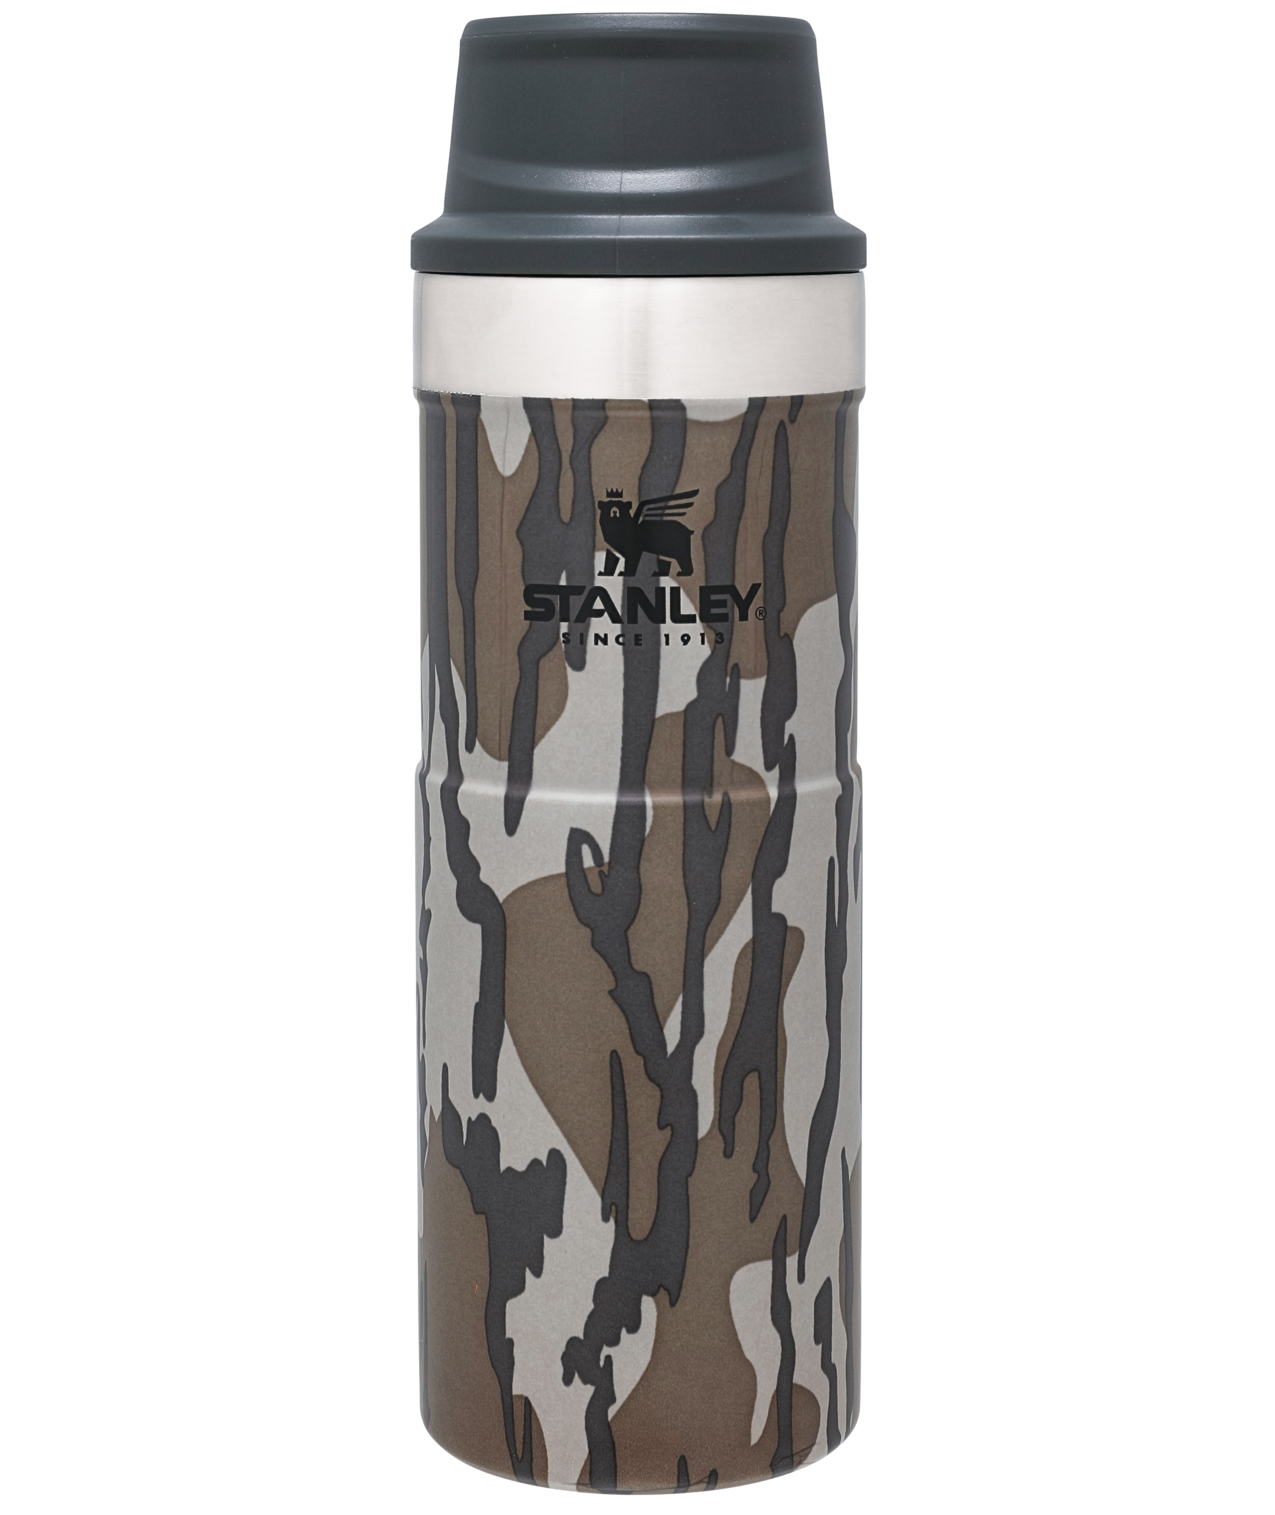 NEW STANLEY Classic Trigger Action Travel Mug 16 oz LeakProof Packable Hot  Cold